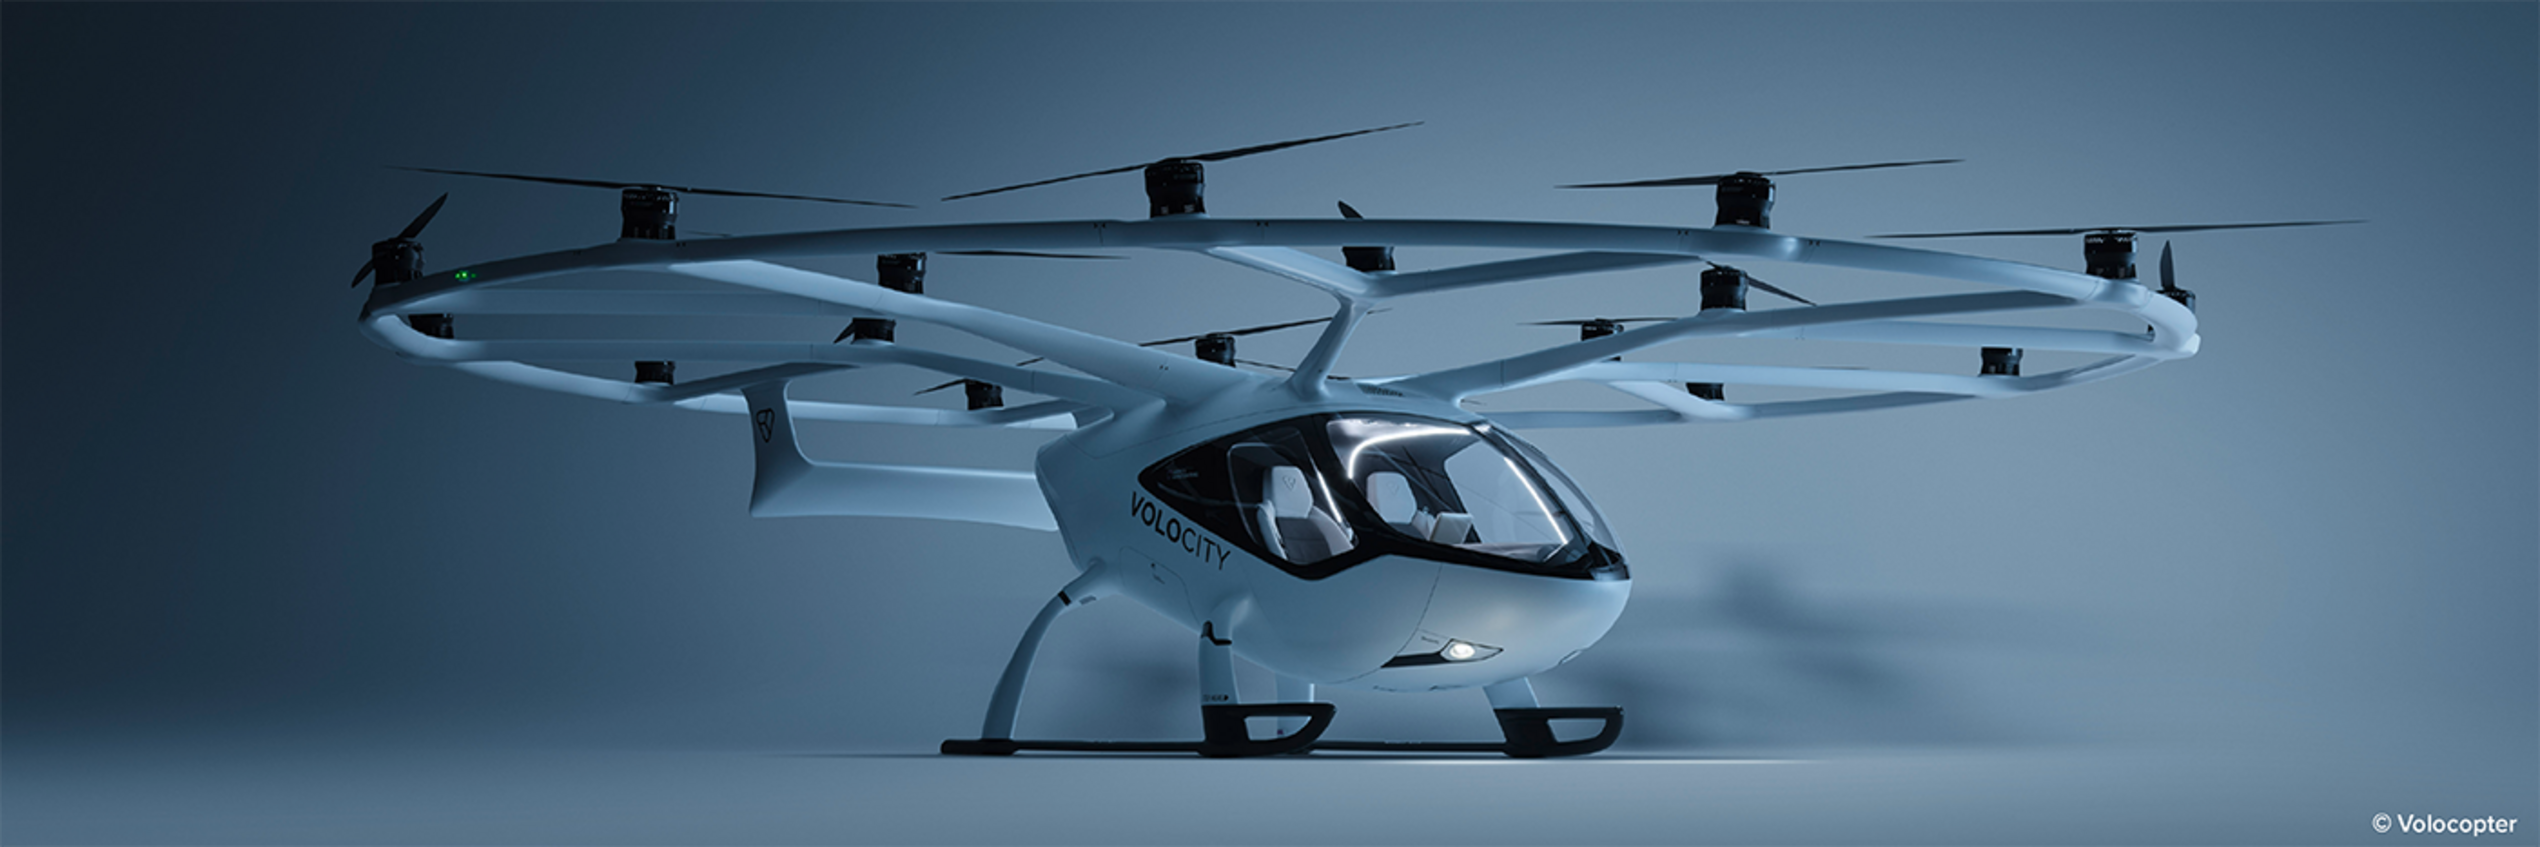 Diehl Aviation expands cooperation with Volocopter for the all-electric air taxi VoloCity